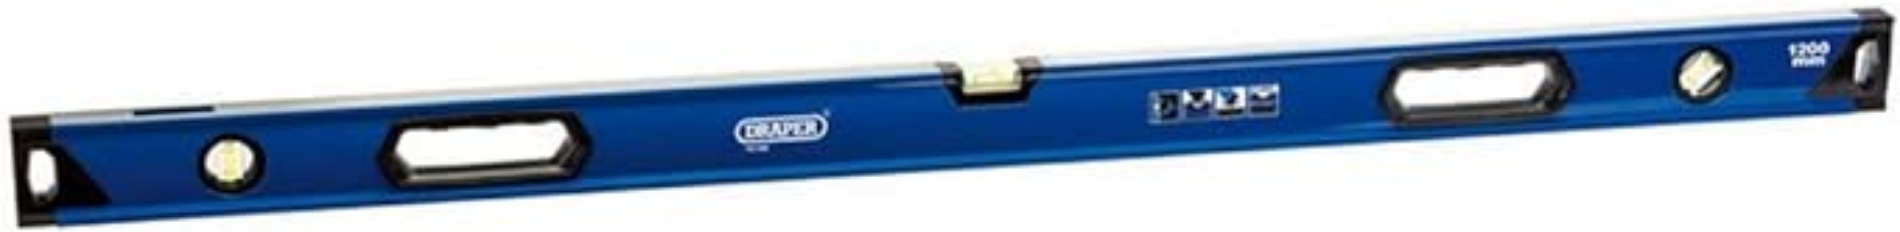 Picture of Draper Box Section Level with Side View Vial (1200mm)